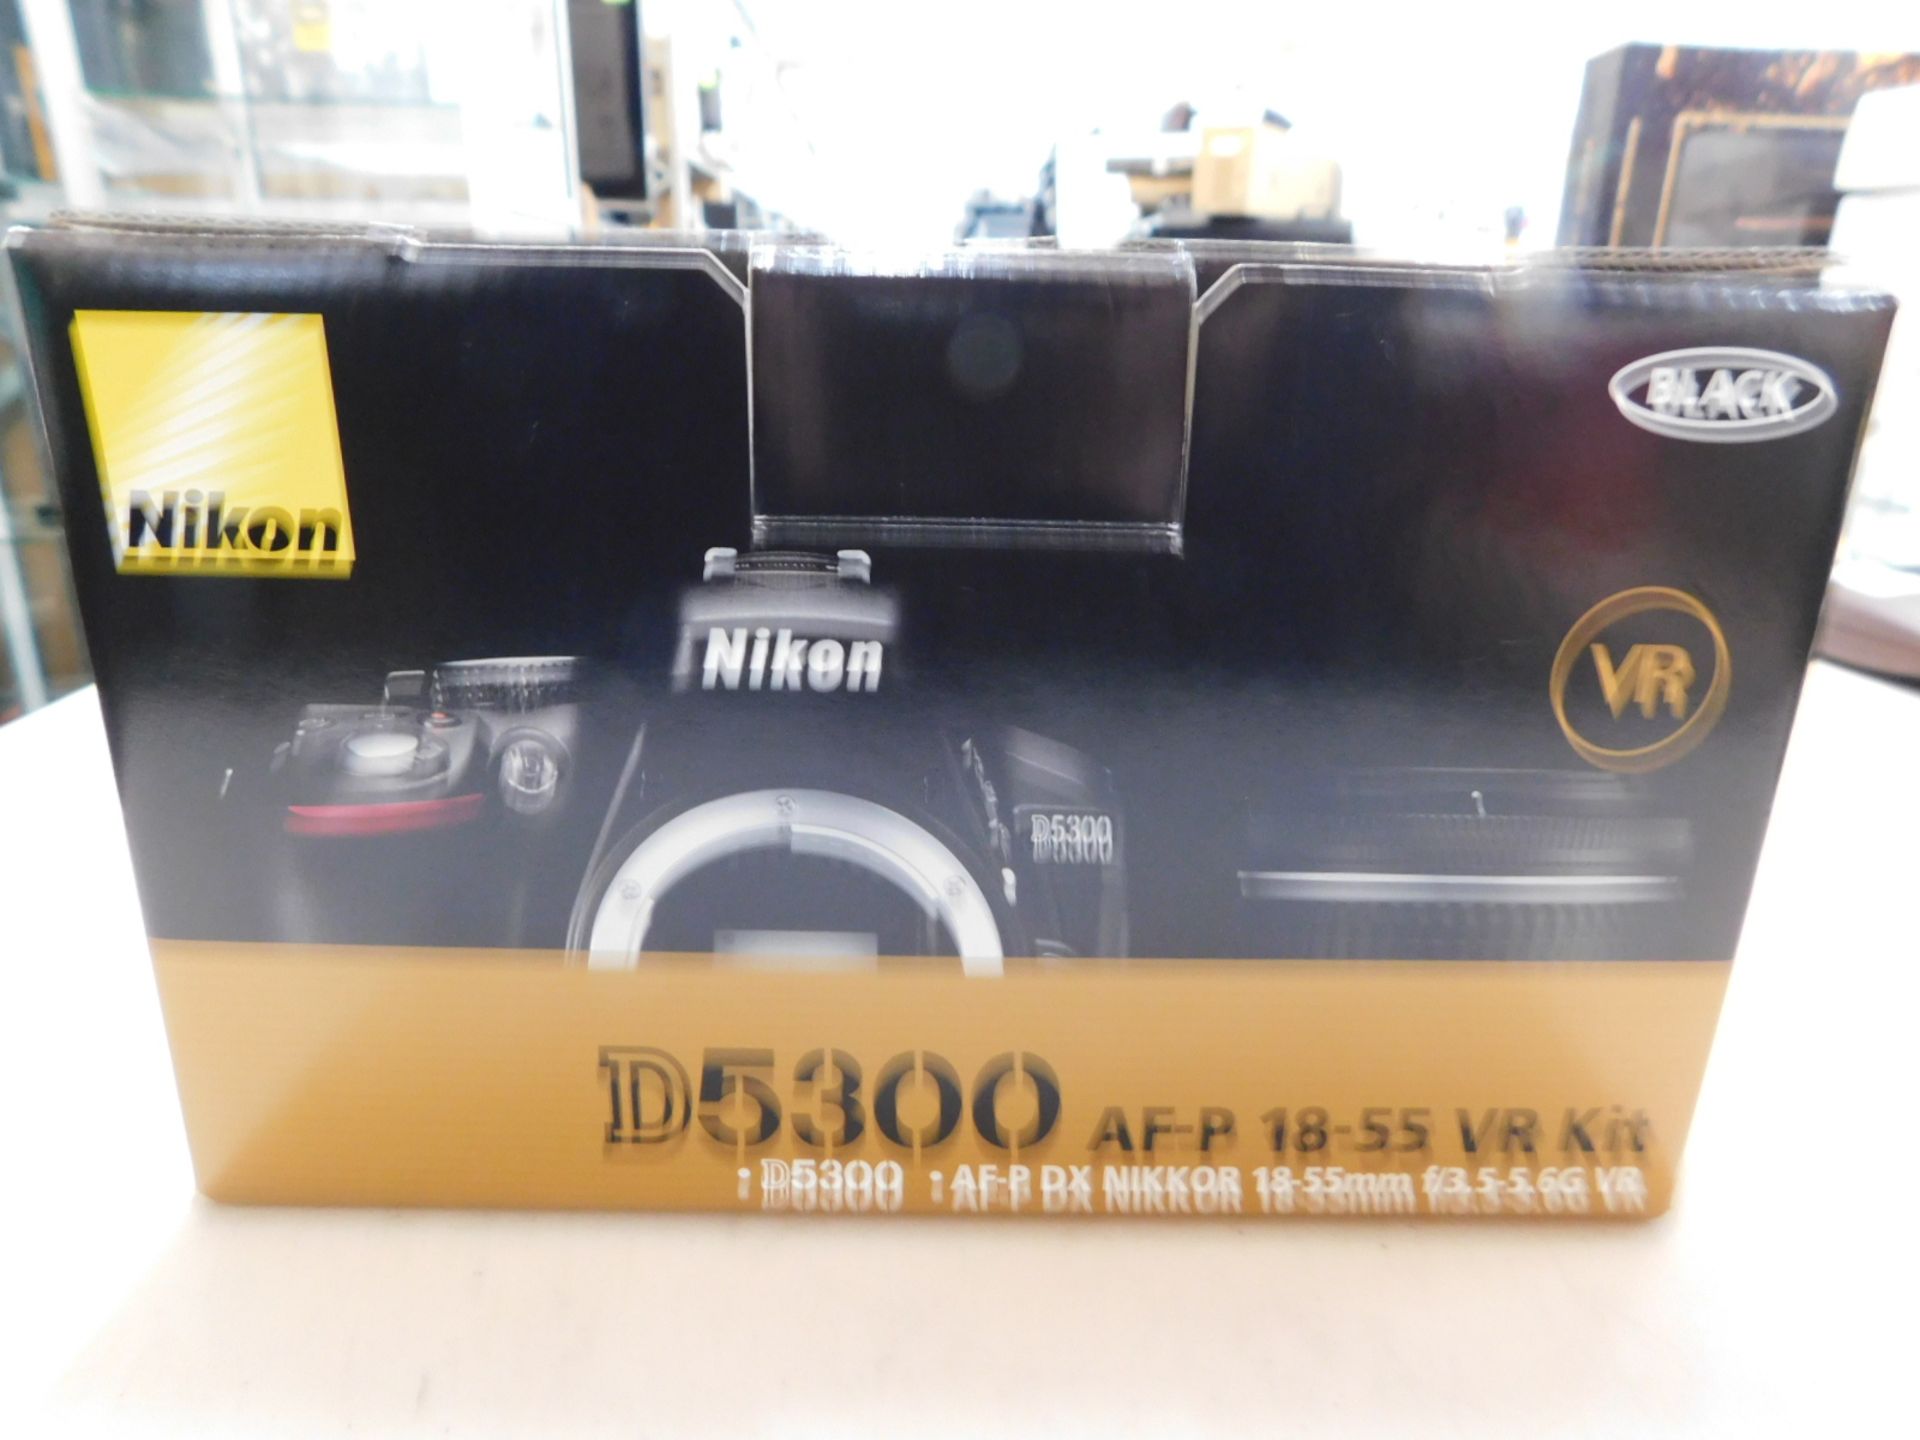 1 BOXED NIKON D5300 DSLR DIGITAL CAMERA WITH 18-55MM LENS AND CARRY BAG RRP Â£499